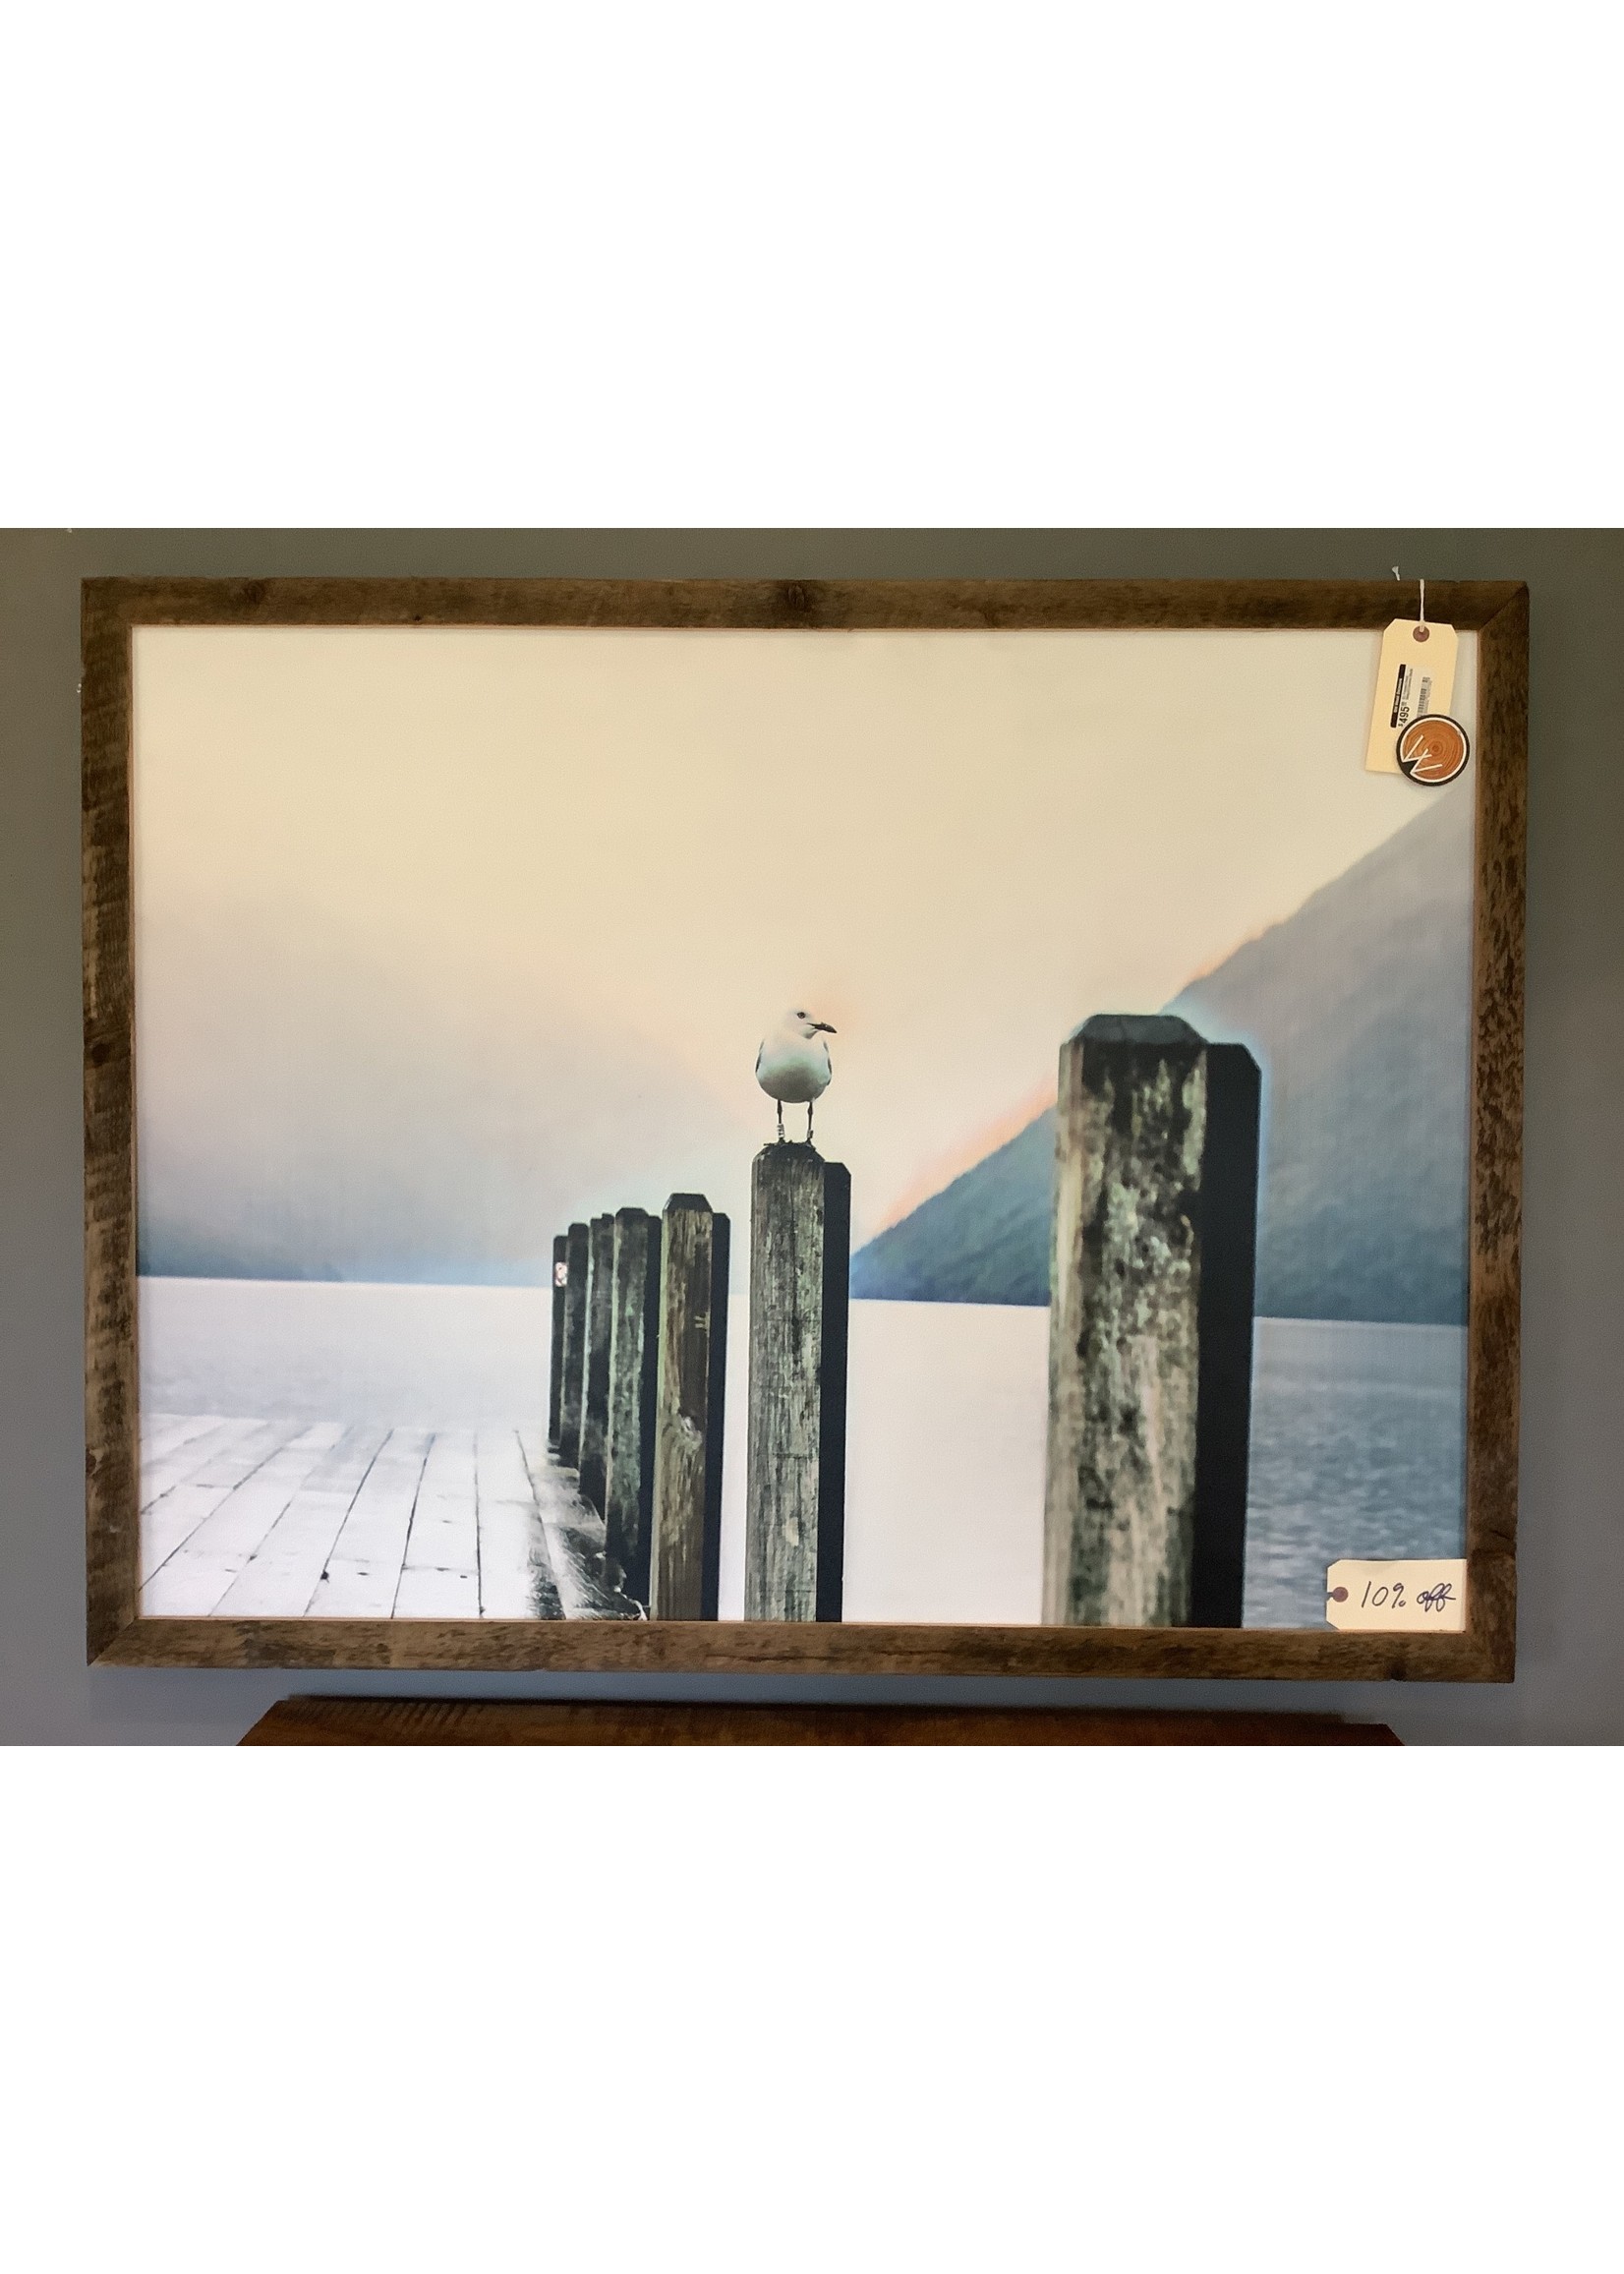 Old Wood Delaware XL Framed Dock Seagull Canvas 38x50